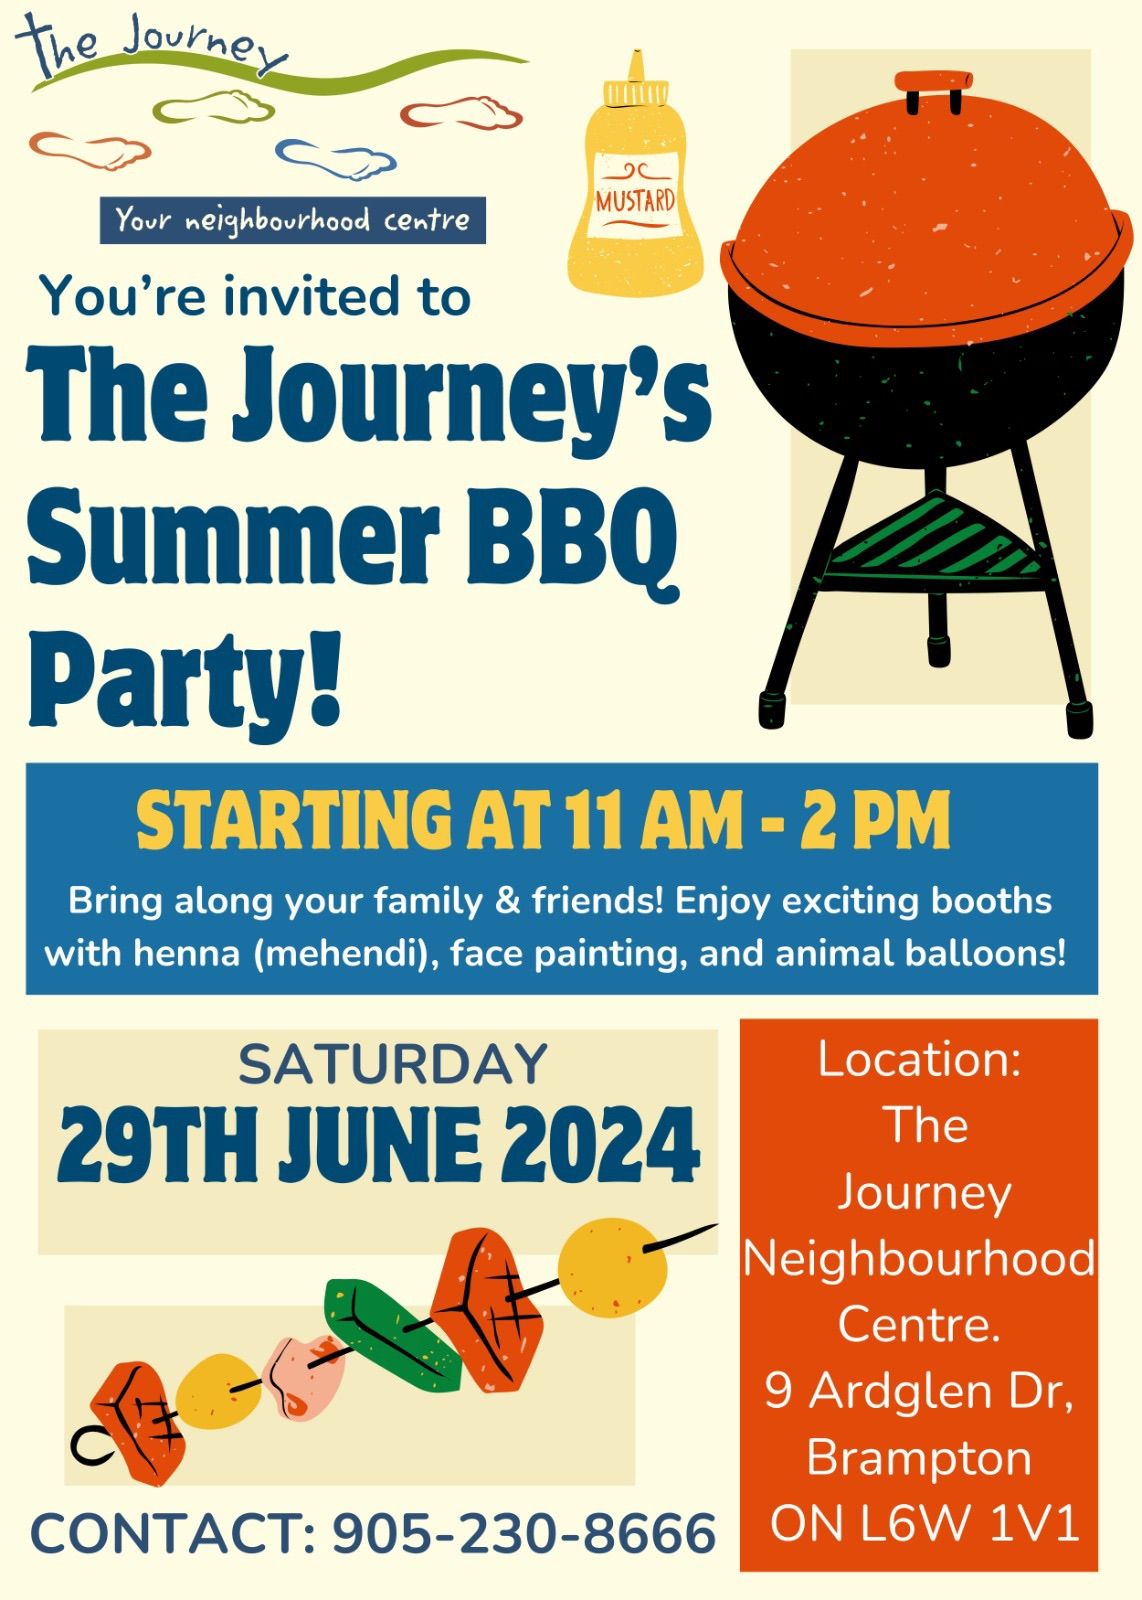 The Journey's Summer BBQ Party